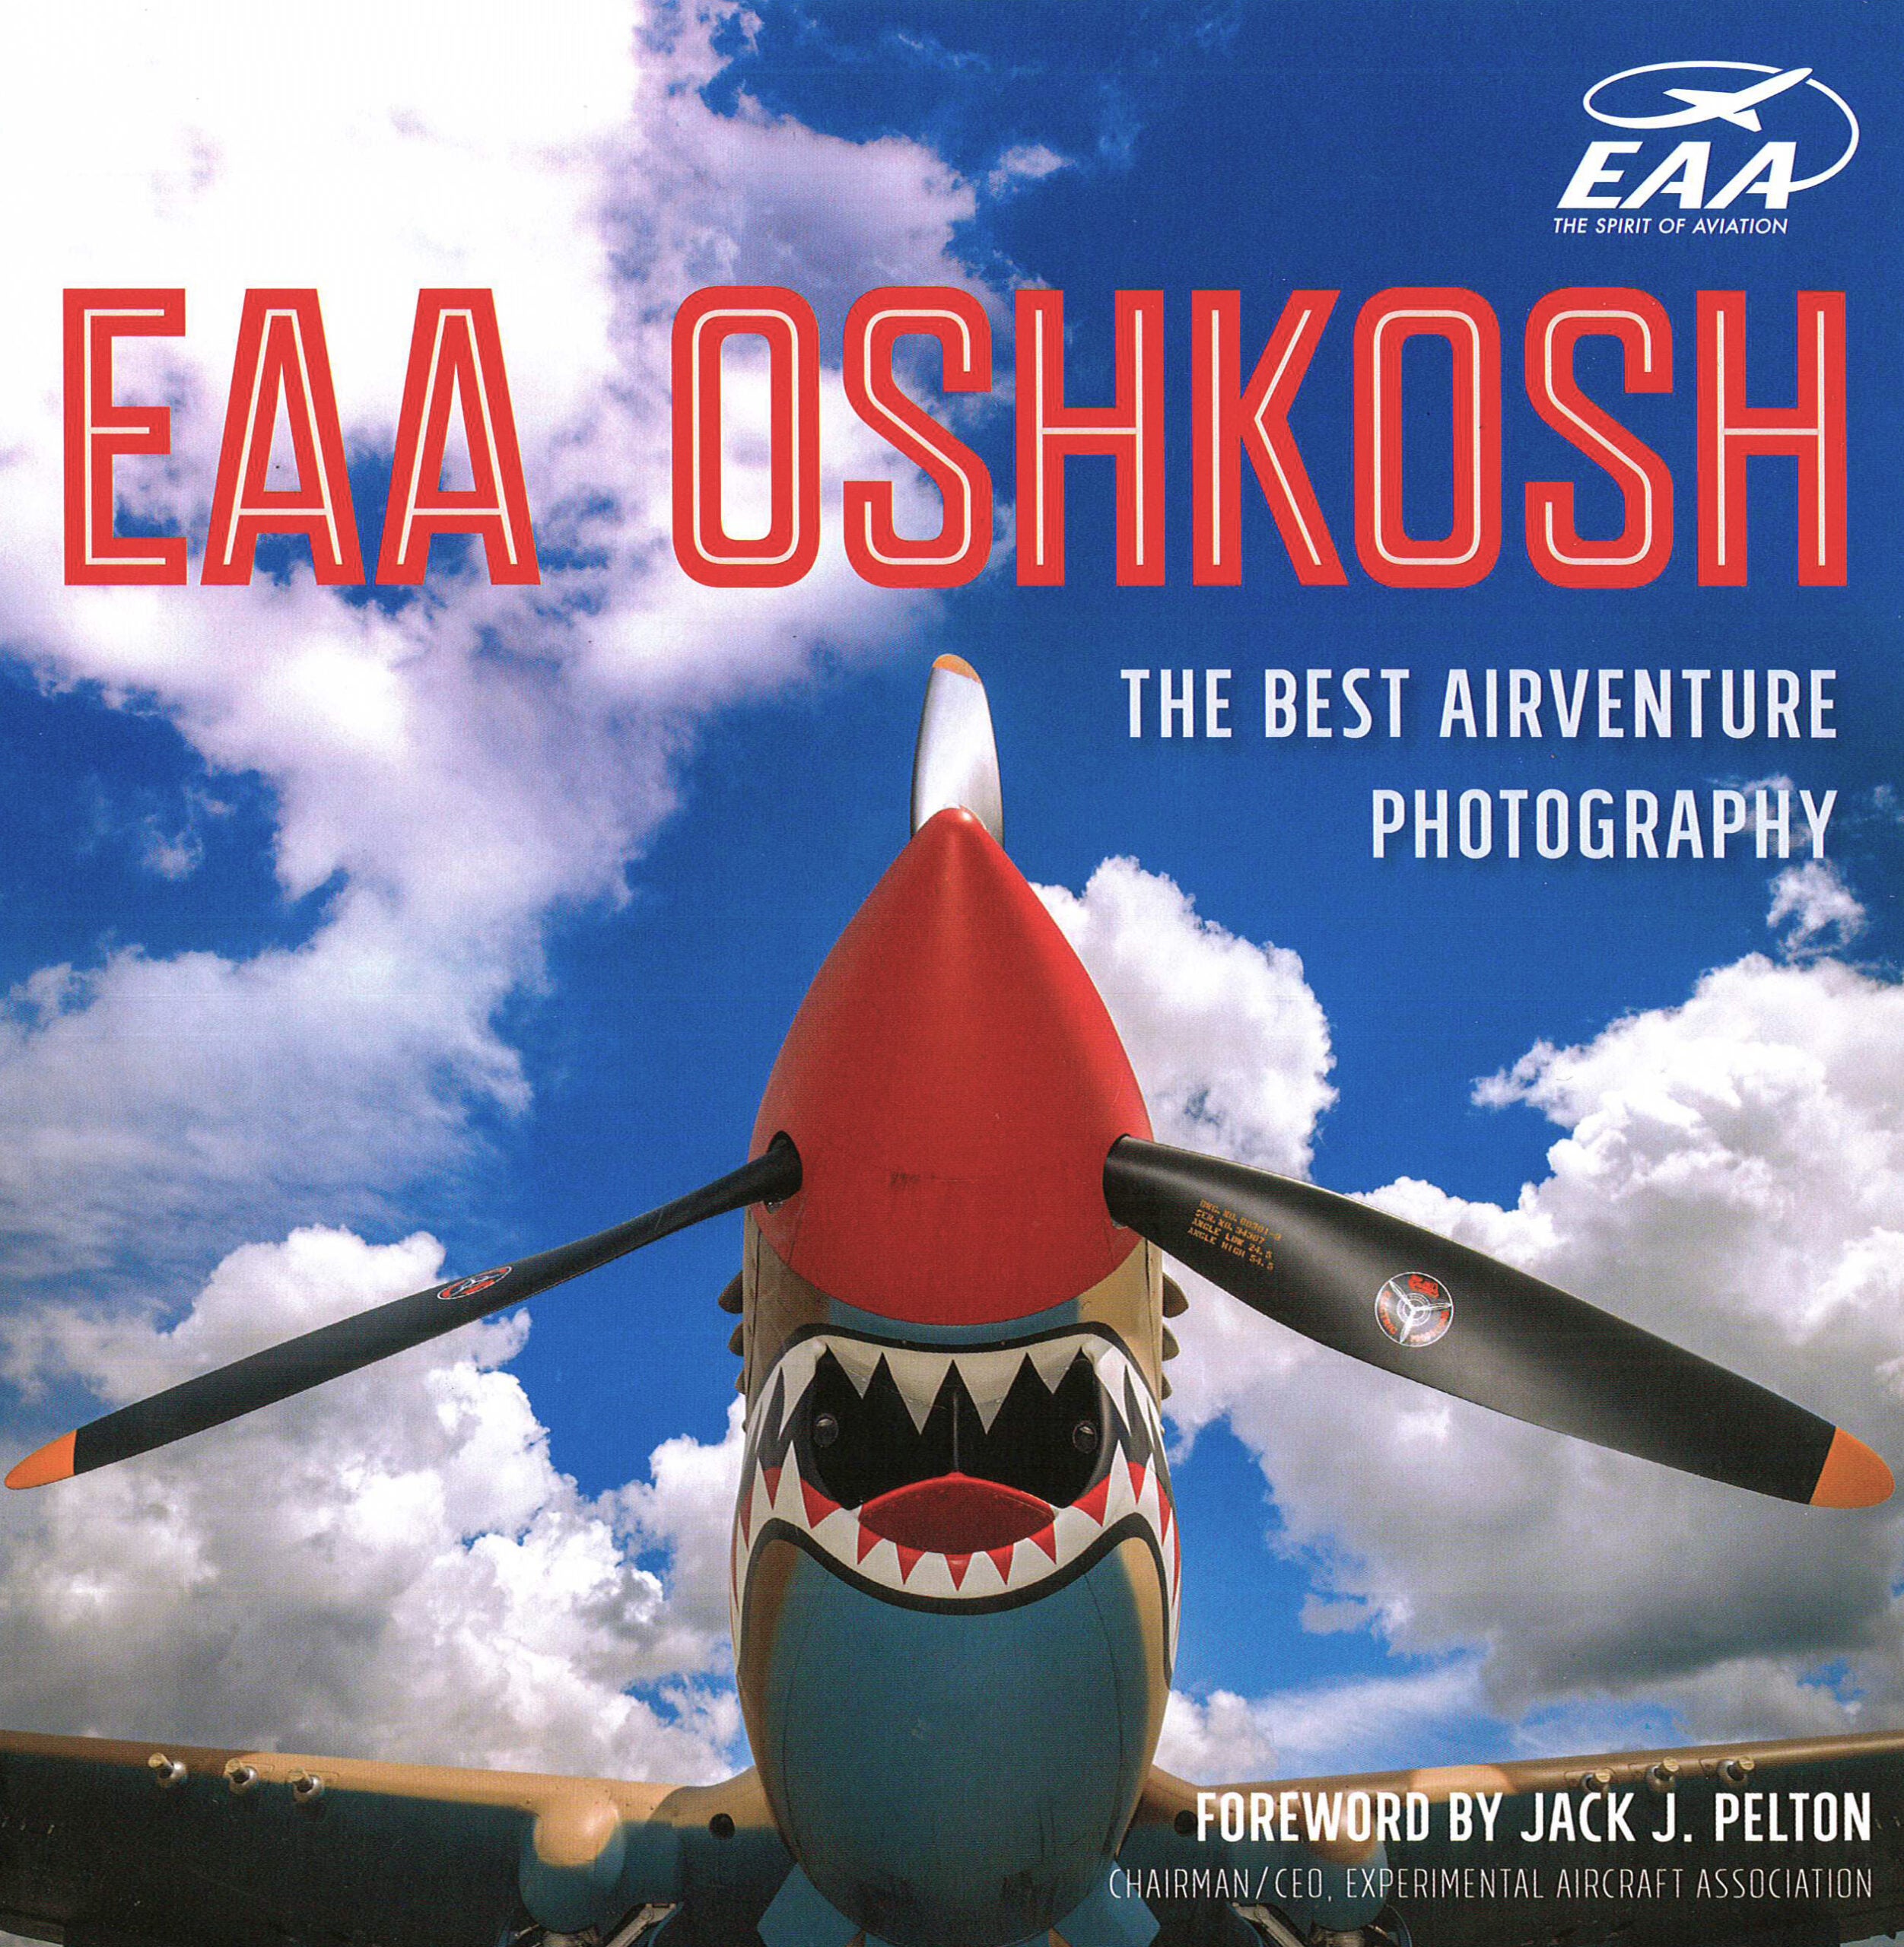 EAA Oshkosh Photo Book as Good as Being There &#8230; Almost